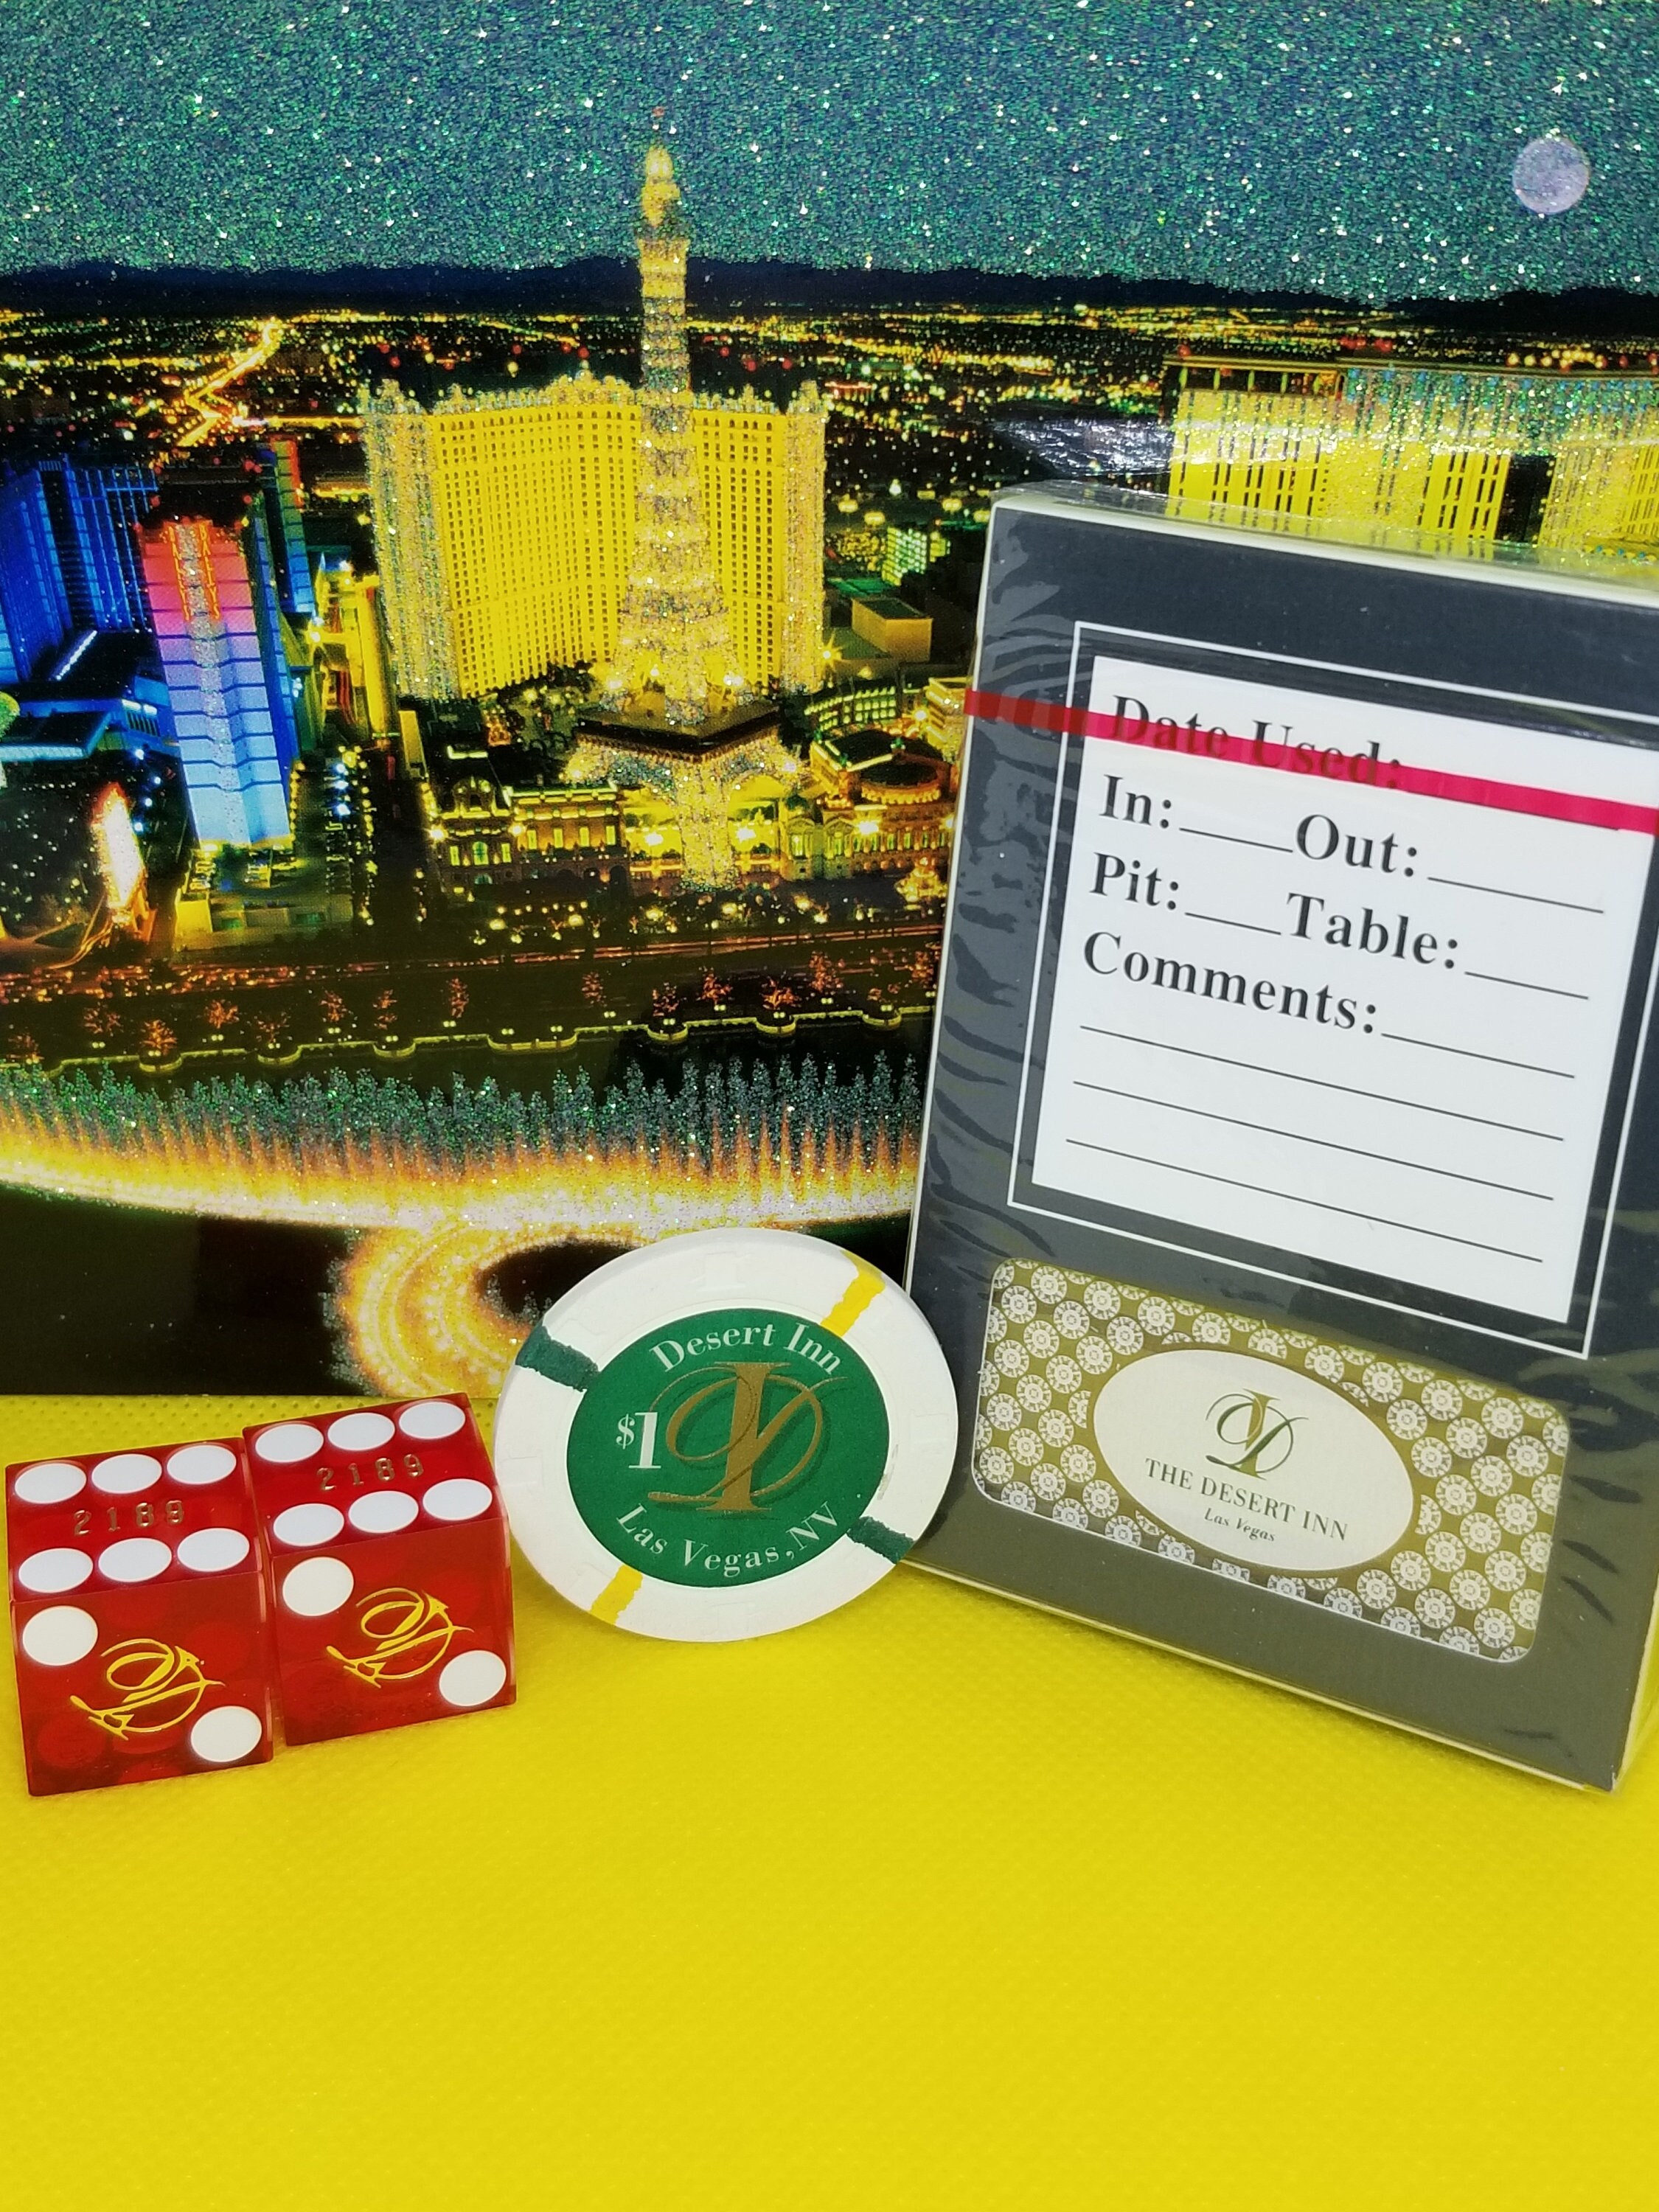 Deck of Playing Cards Used in a Las Vegas Casino